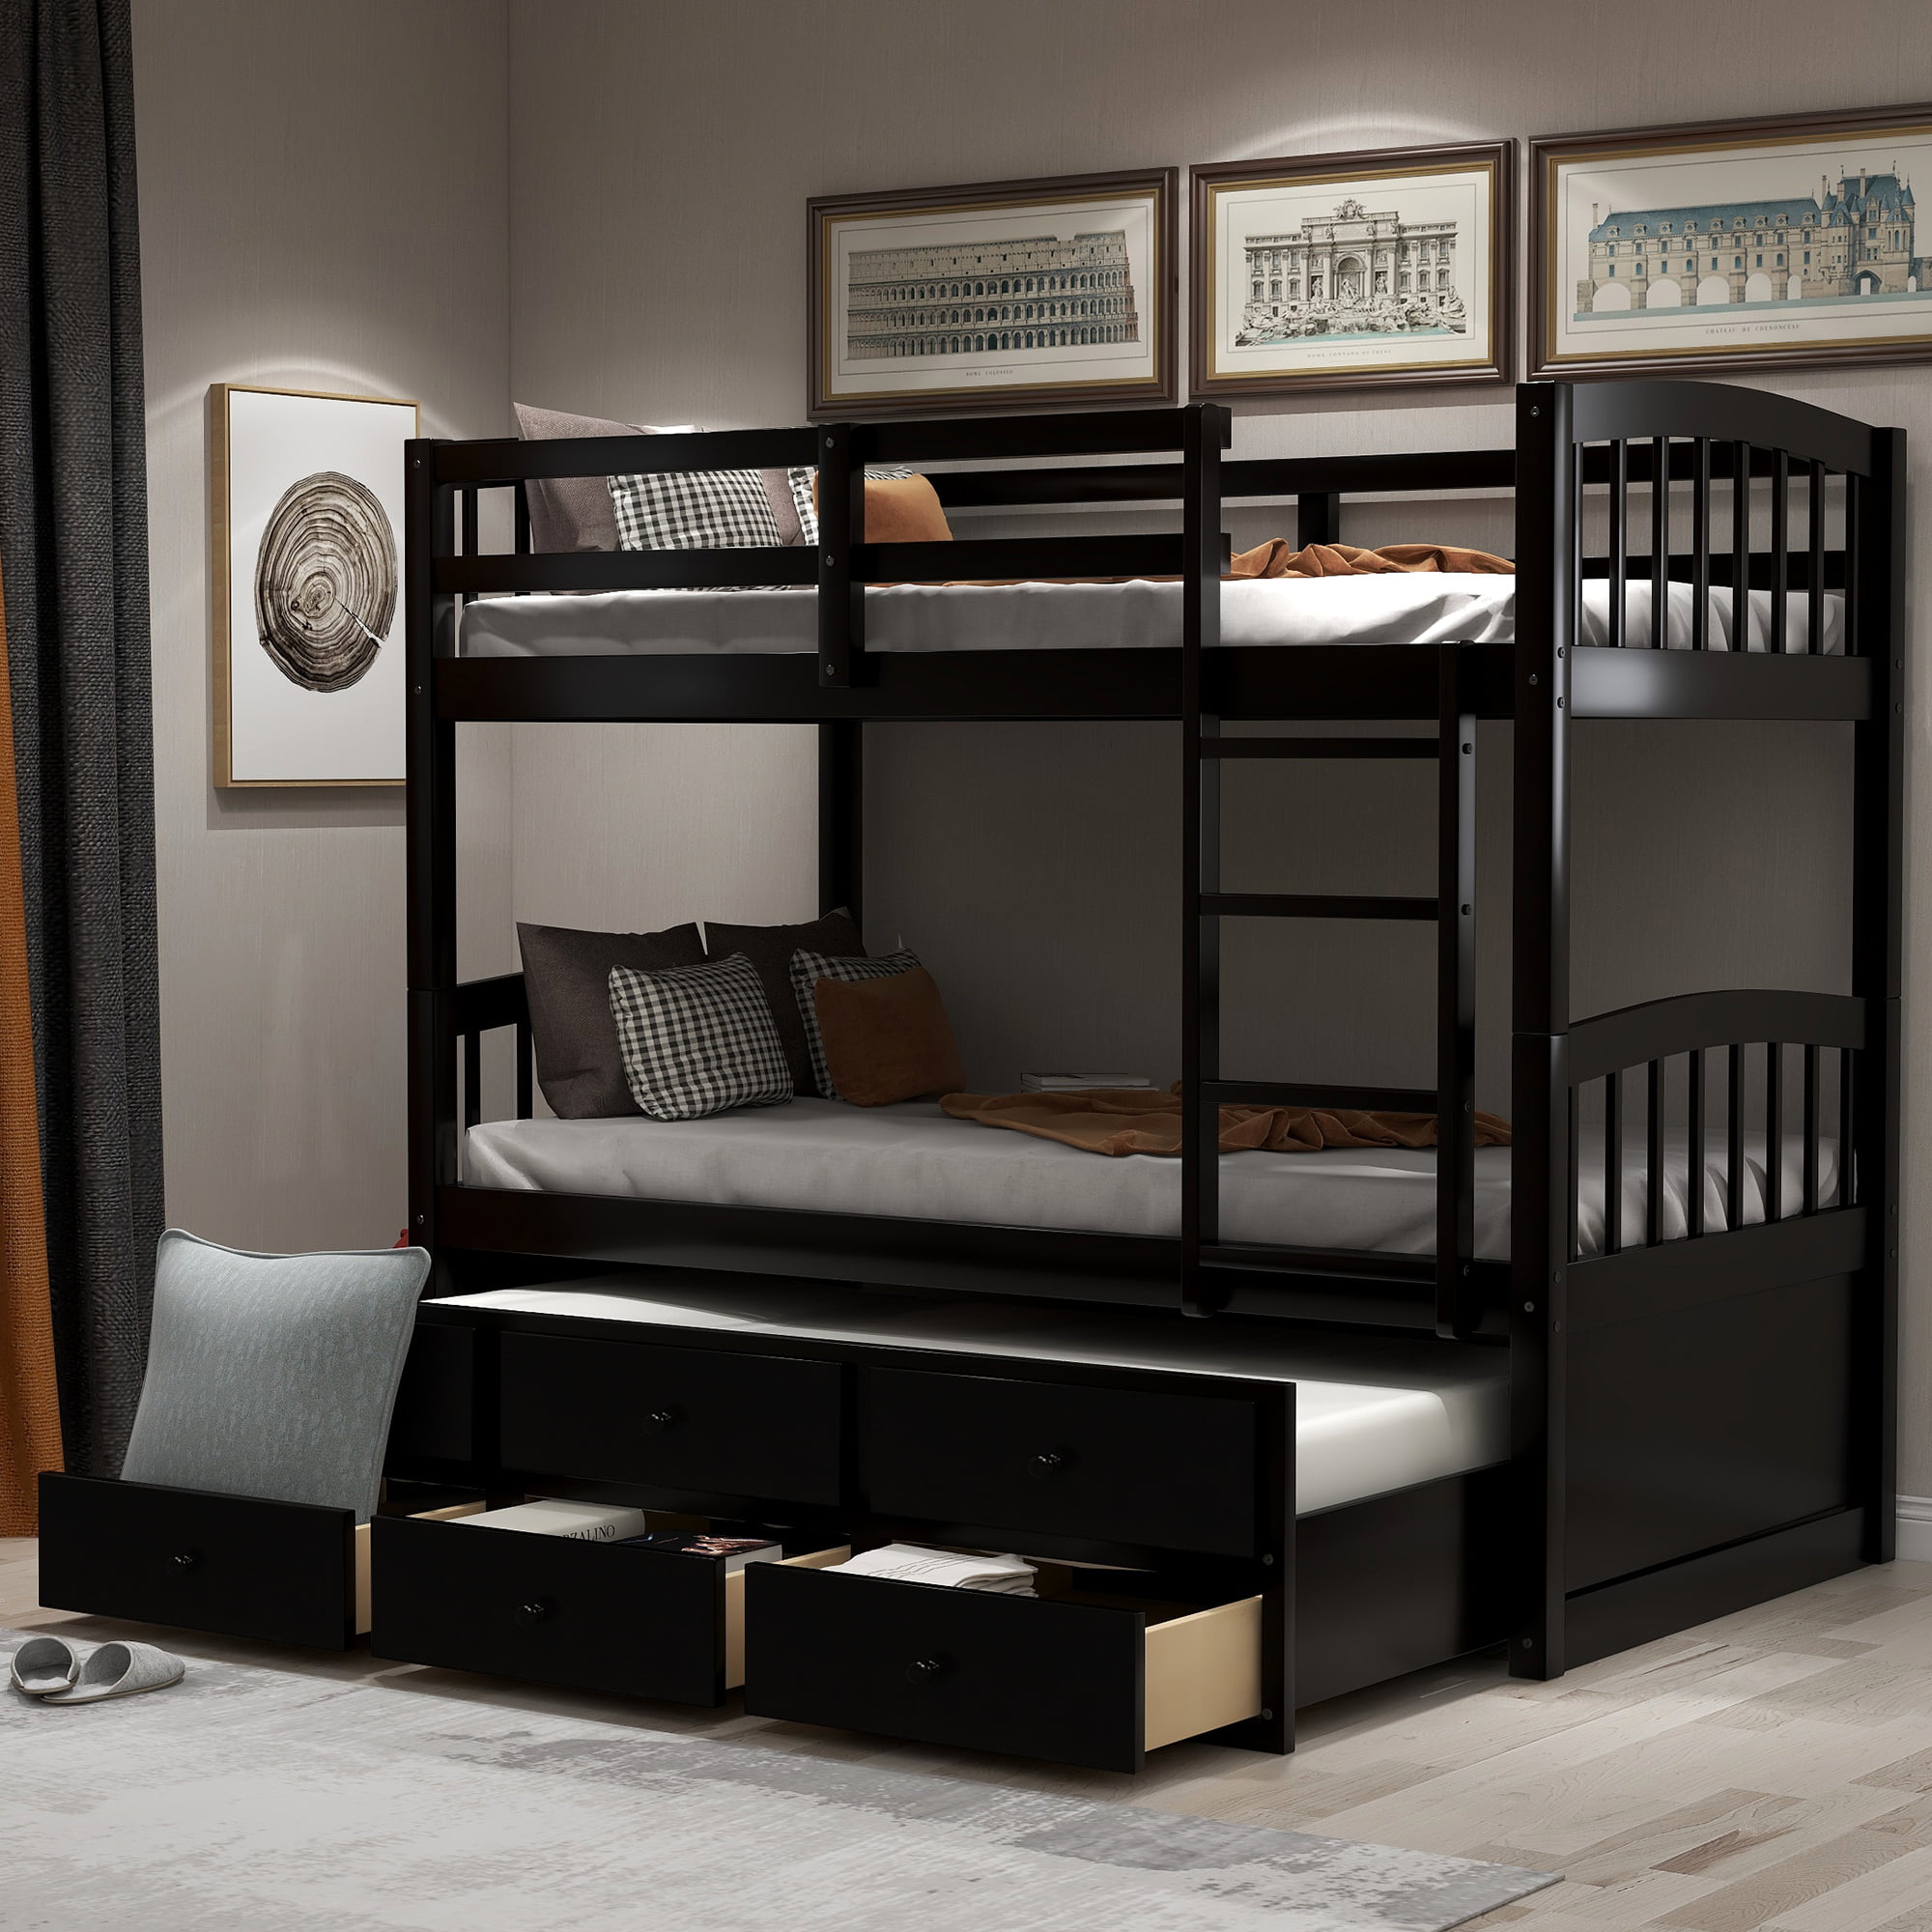 Twin Bunk Beds Solid Wood, Wooden Bunk Beds With Drawers